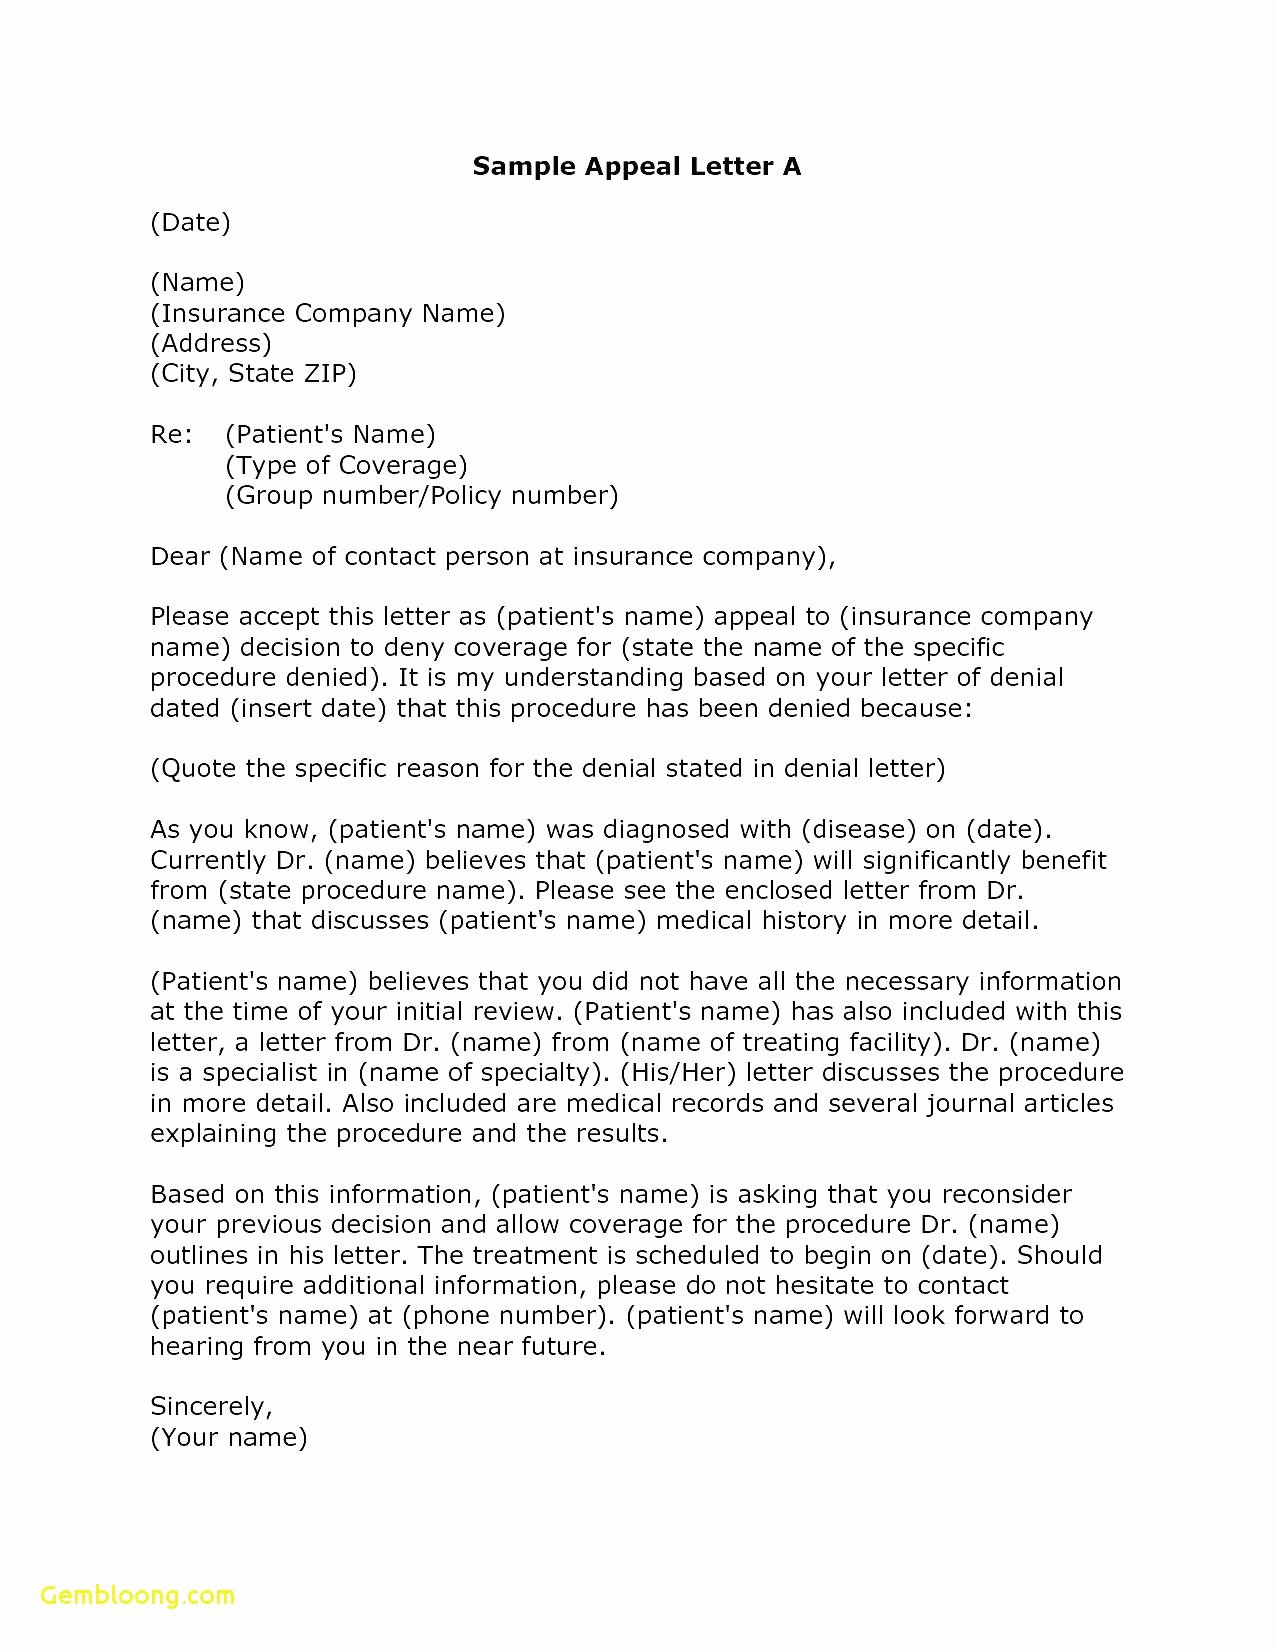 Claim Denial Letter Template New Sample Appeal Letter to Insurance Pany From Patient